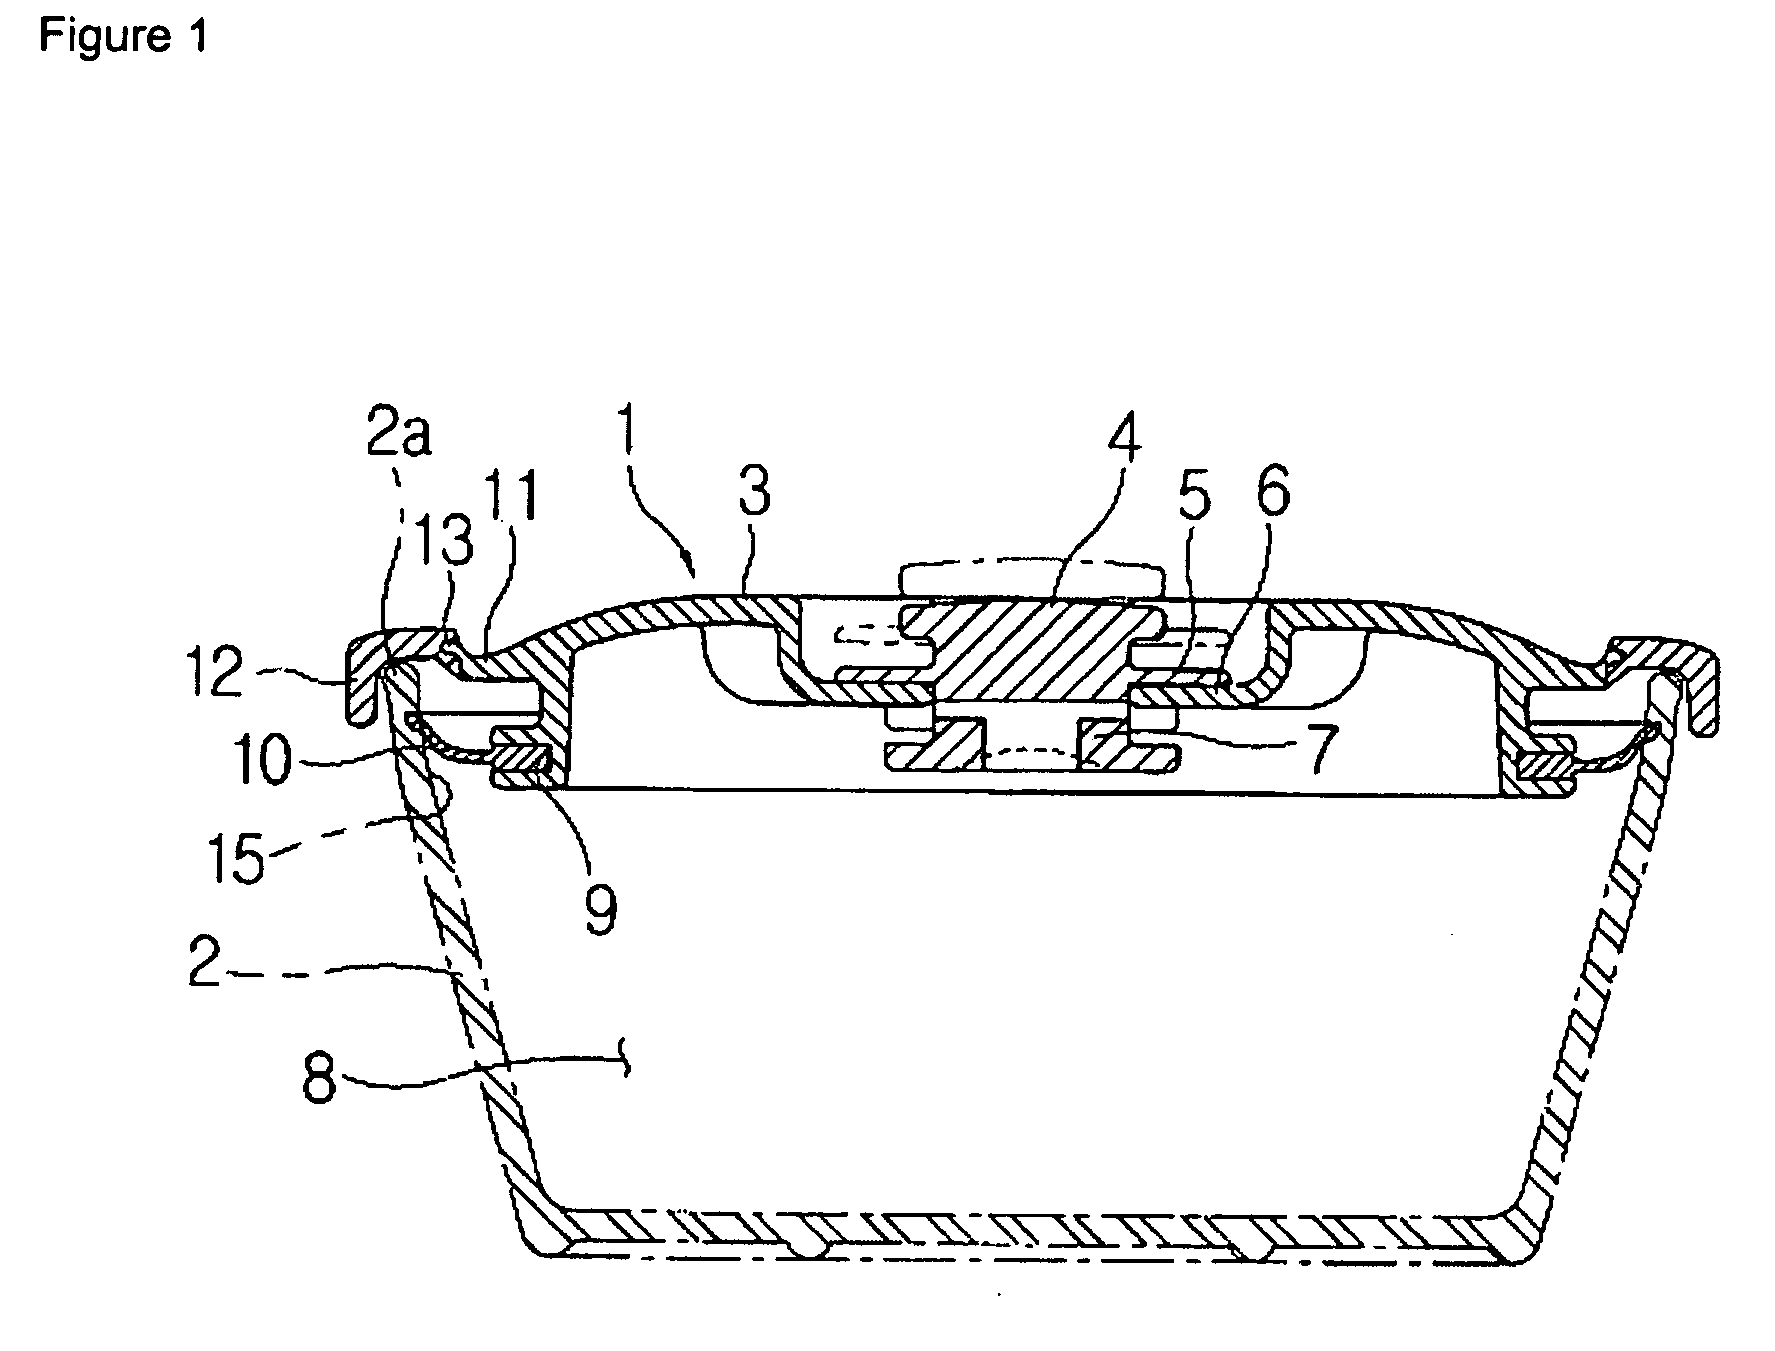 Sealed container lid of vacuum valve operation type